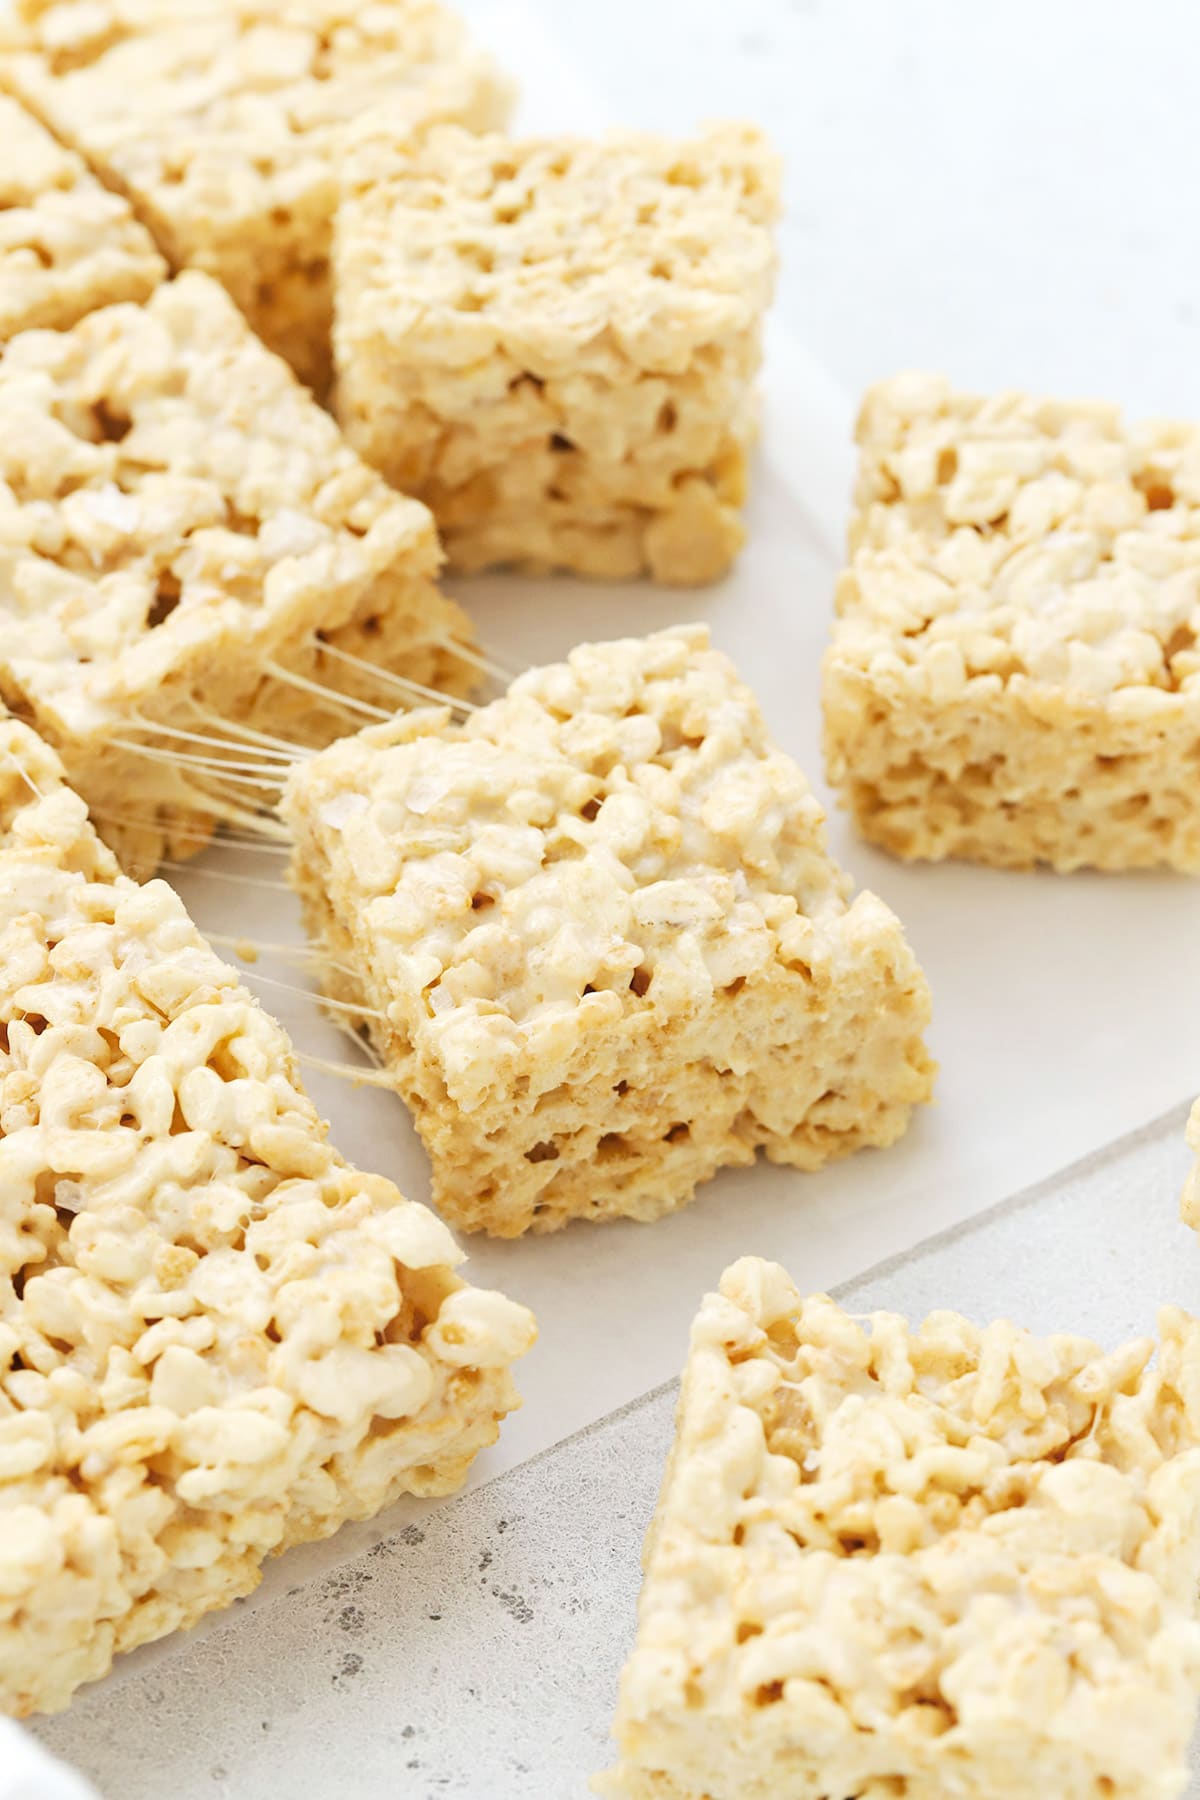 Pulling a square of gluten-free brown butter rice krispies treats away showing the gooey texture